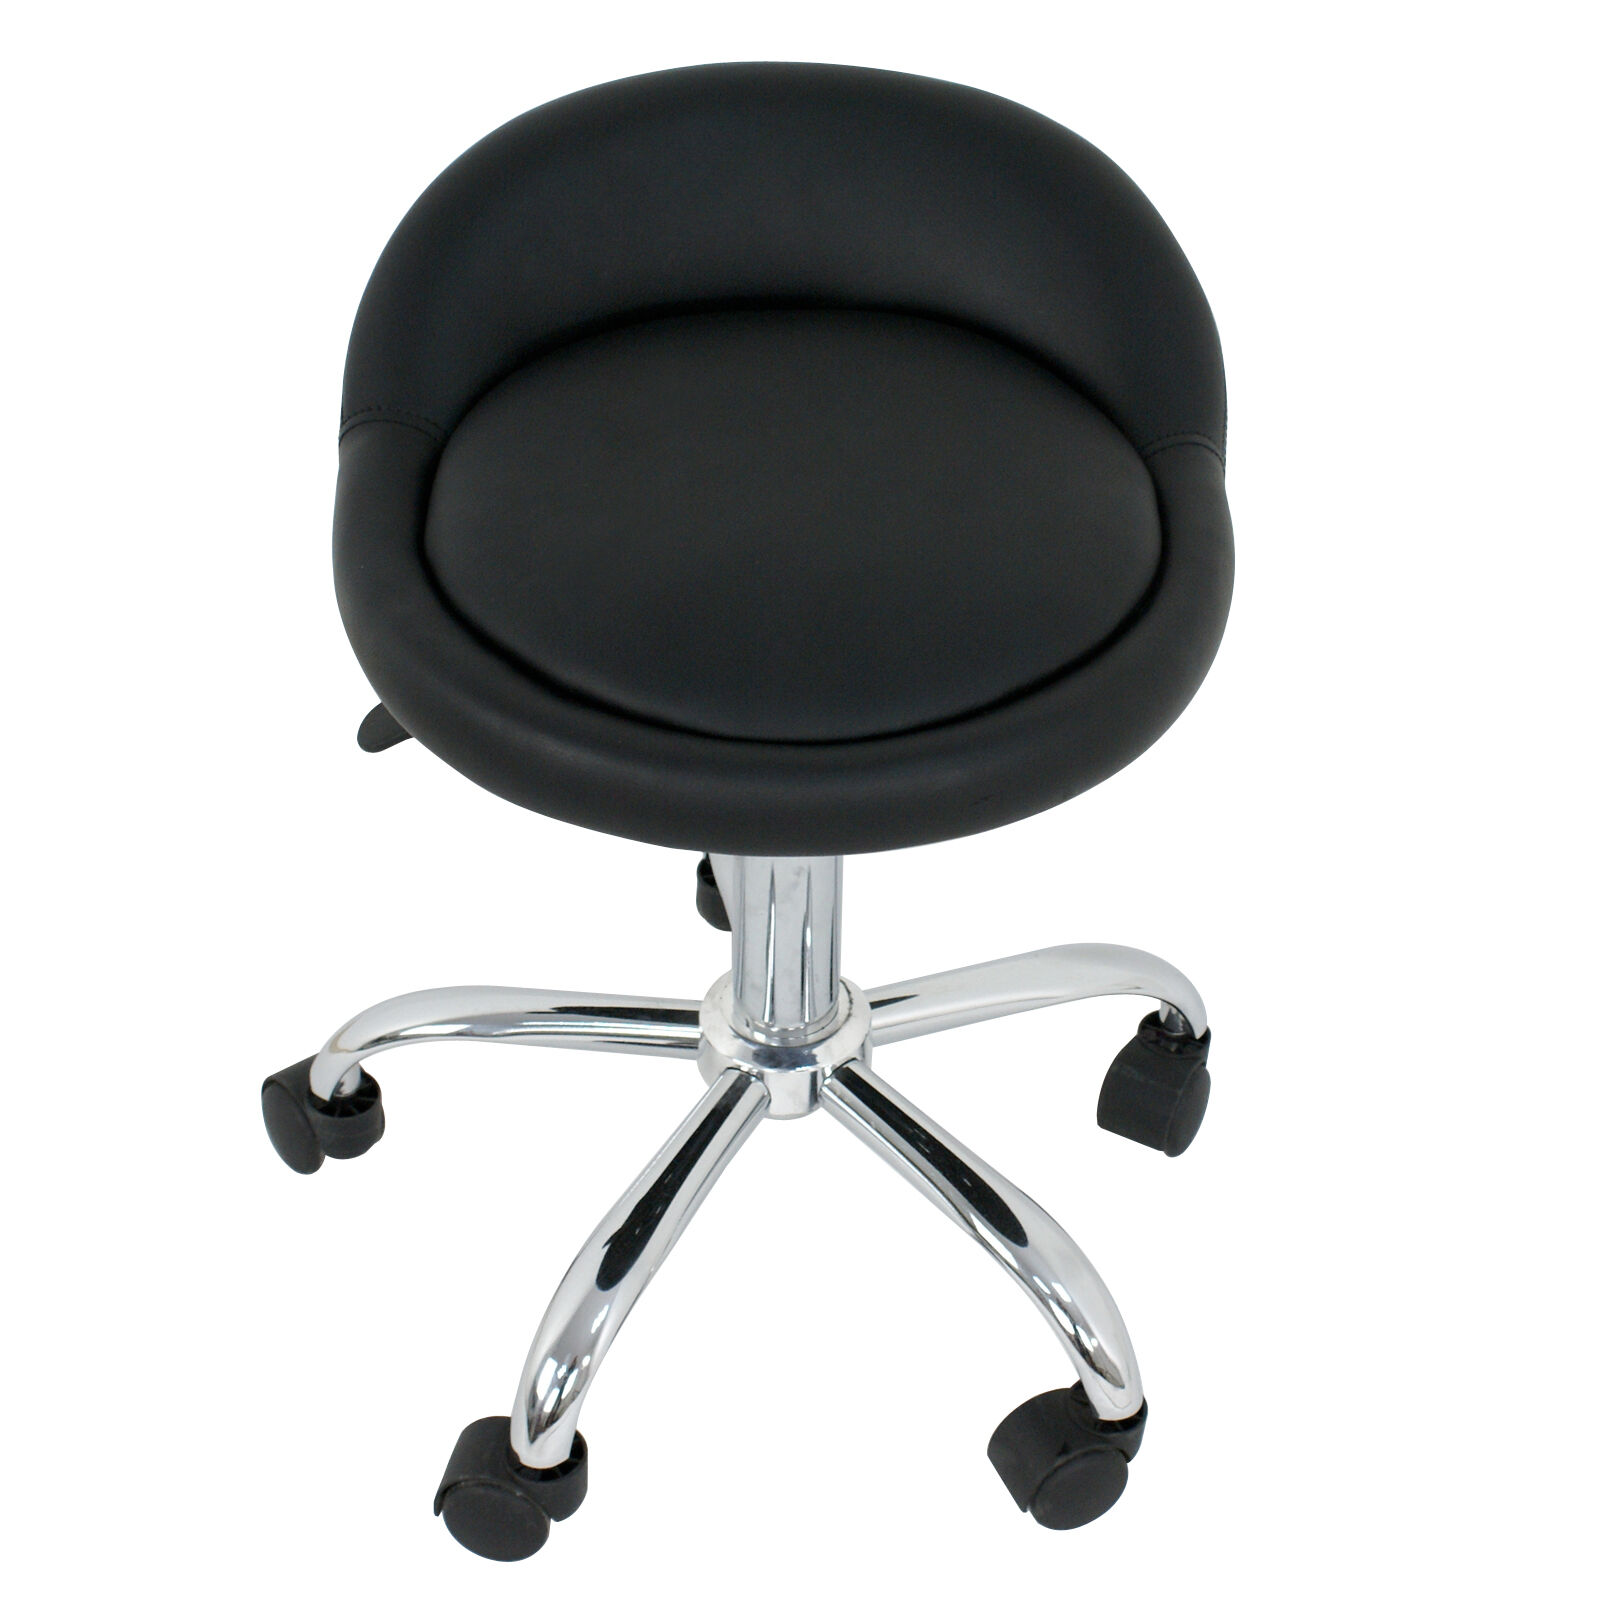 Adjustable Height Hydraulic Rolling Swivel Stool Spa Salon Chair With Back Rest